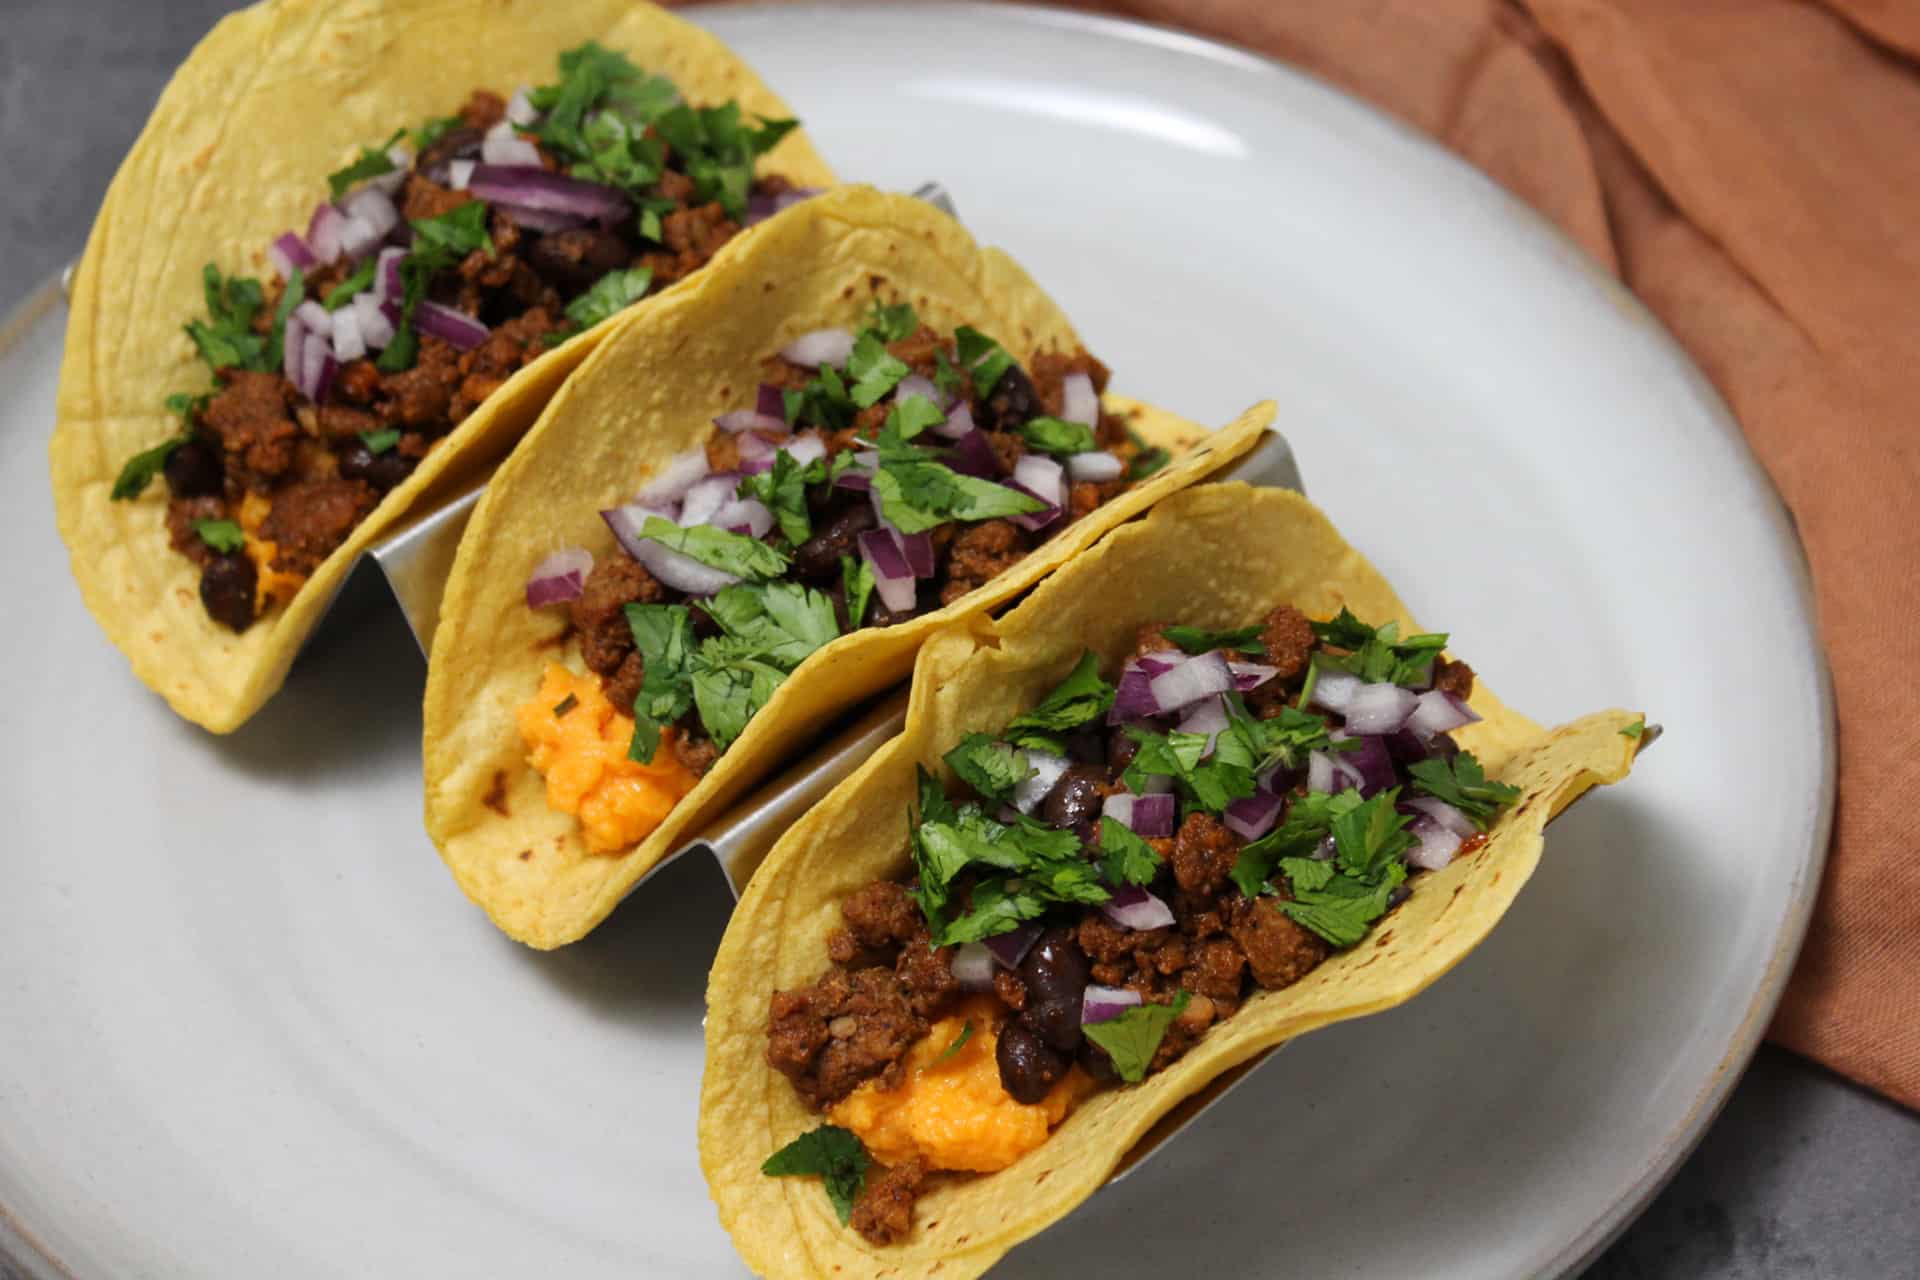 Three tacos made with mashed sweet potato, chorizo, and black beans in corn tortillas